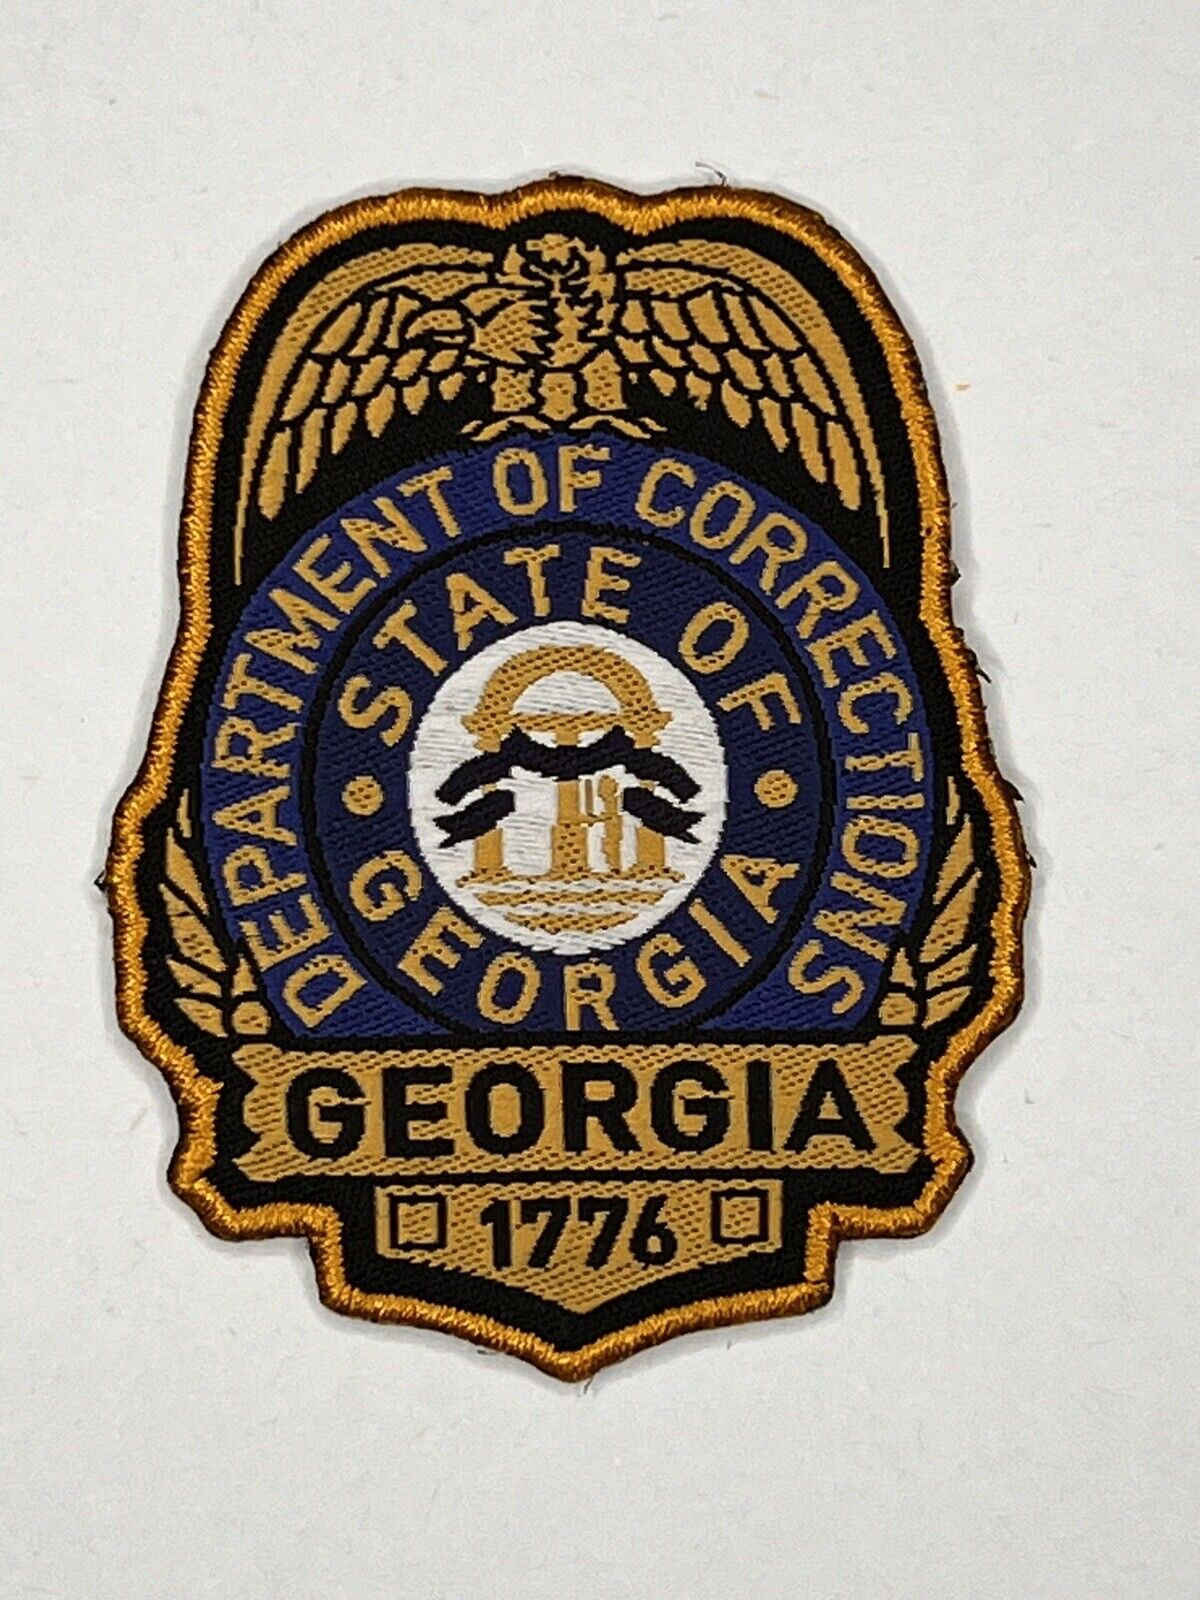 State Of Georgia Department Of Corrections Officer Patch